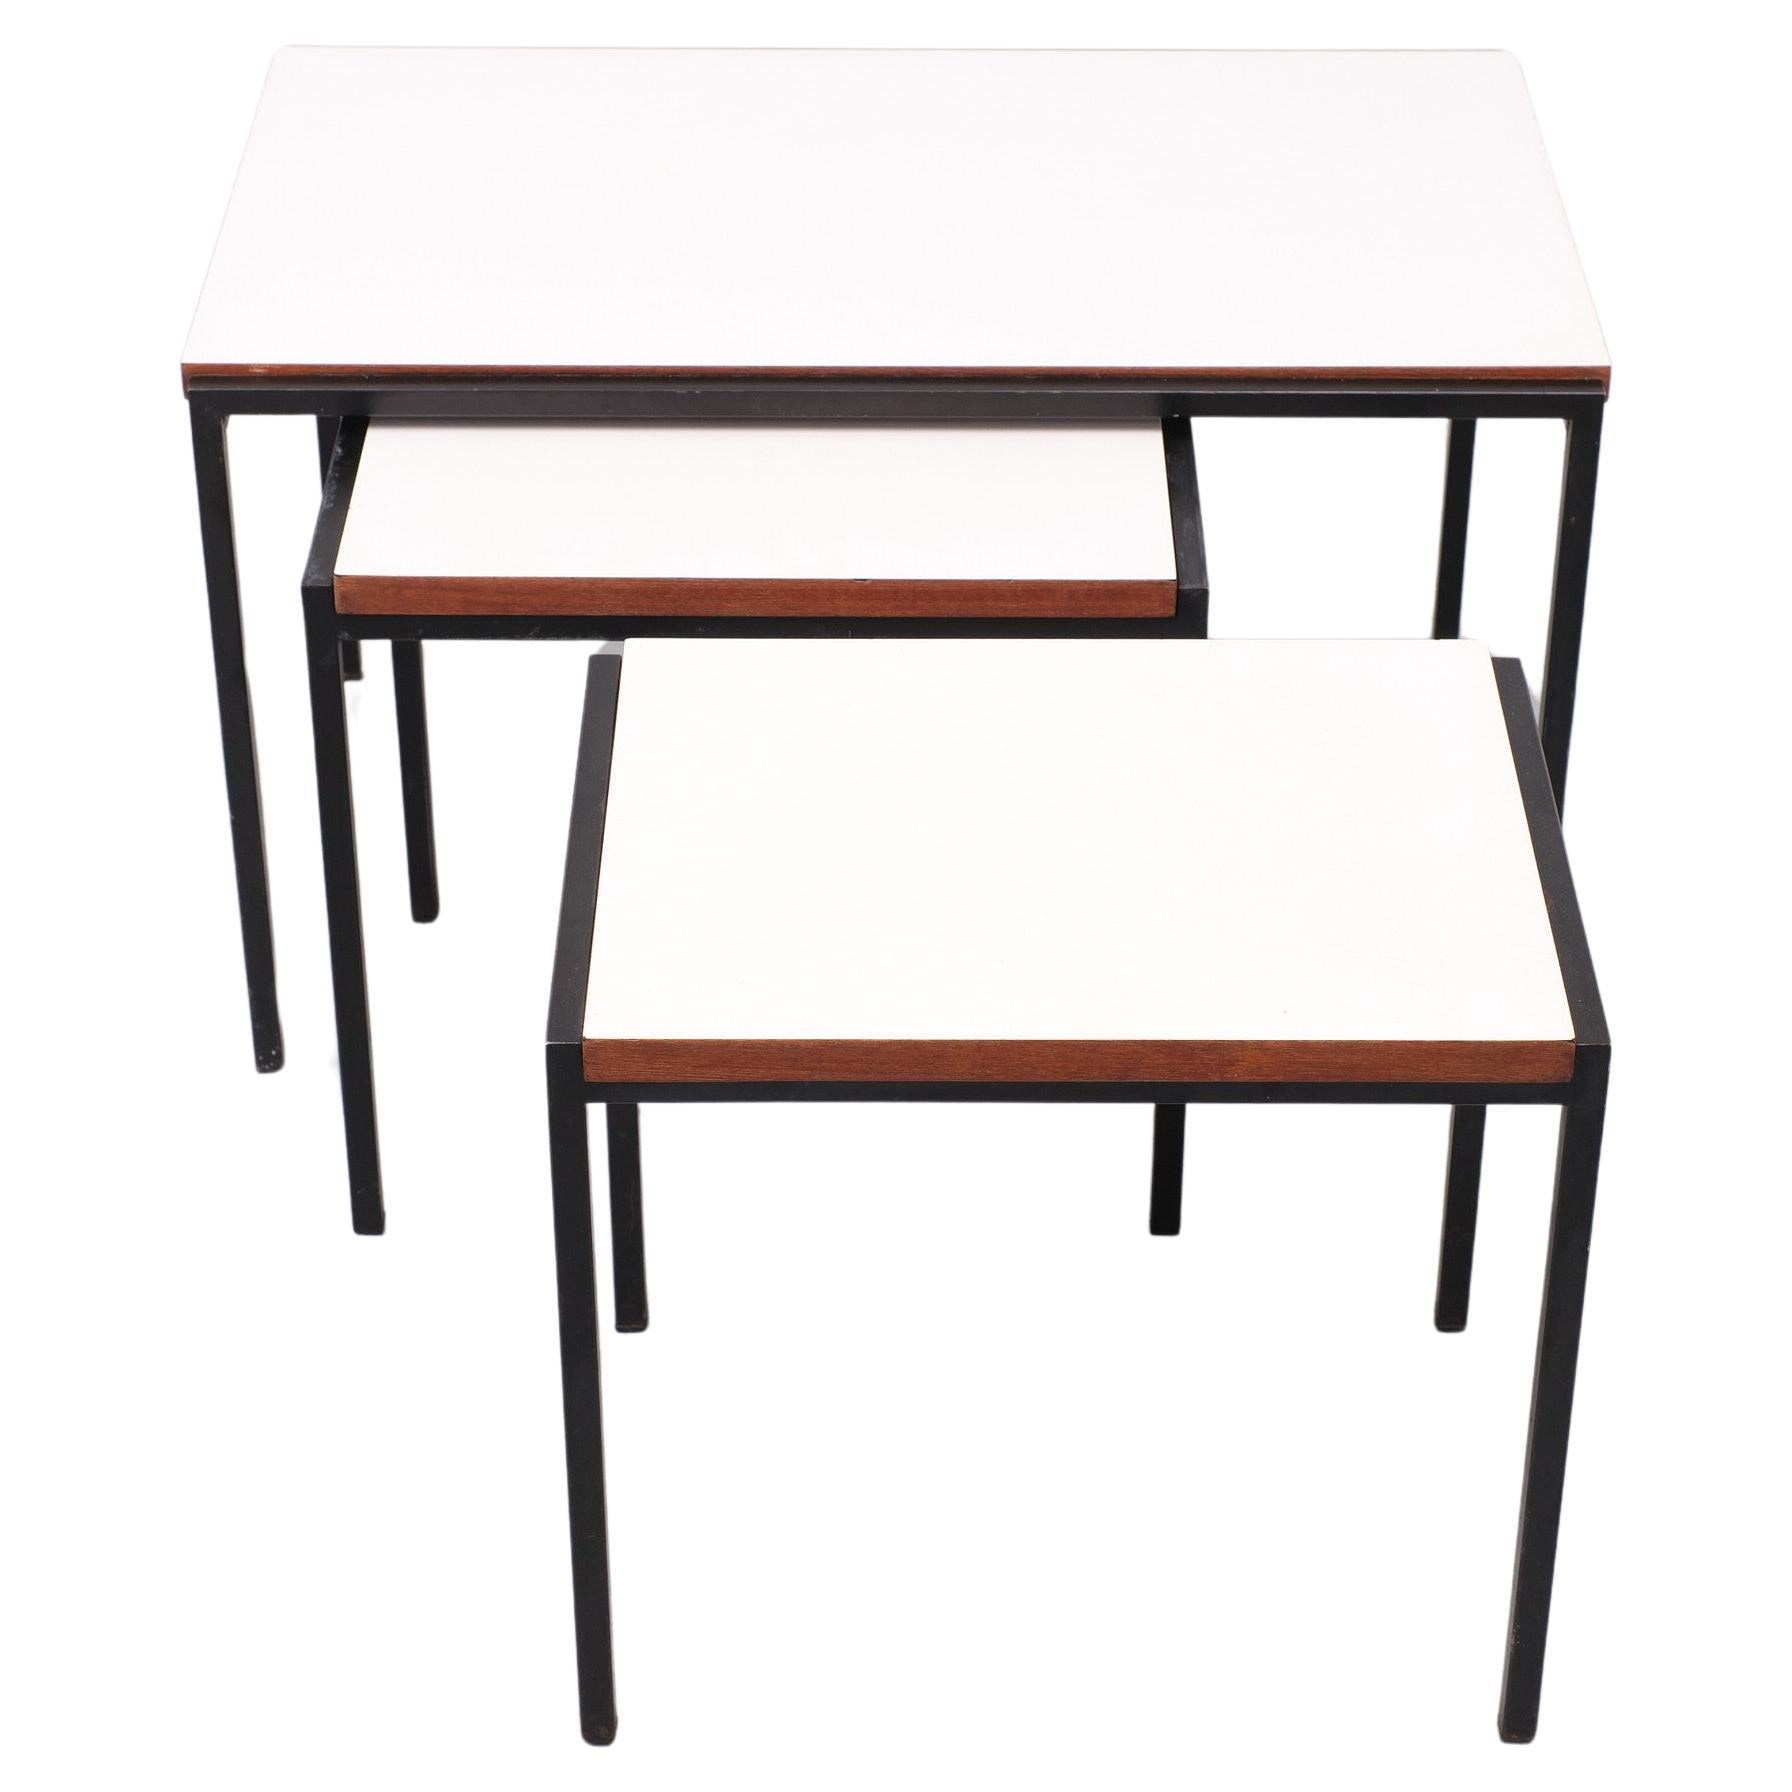 Rare set of nesting tables .Black Square Metal frame ,Comes with a White 
laminated top ,And teak wood sides . Design by Cees Braakman  for Pastoe 
from the so called ''Japan series ''  Great minimalist design . 

Please don't hesitate to reach out